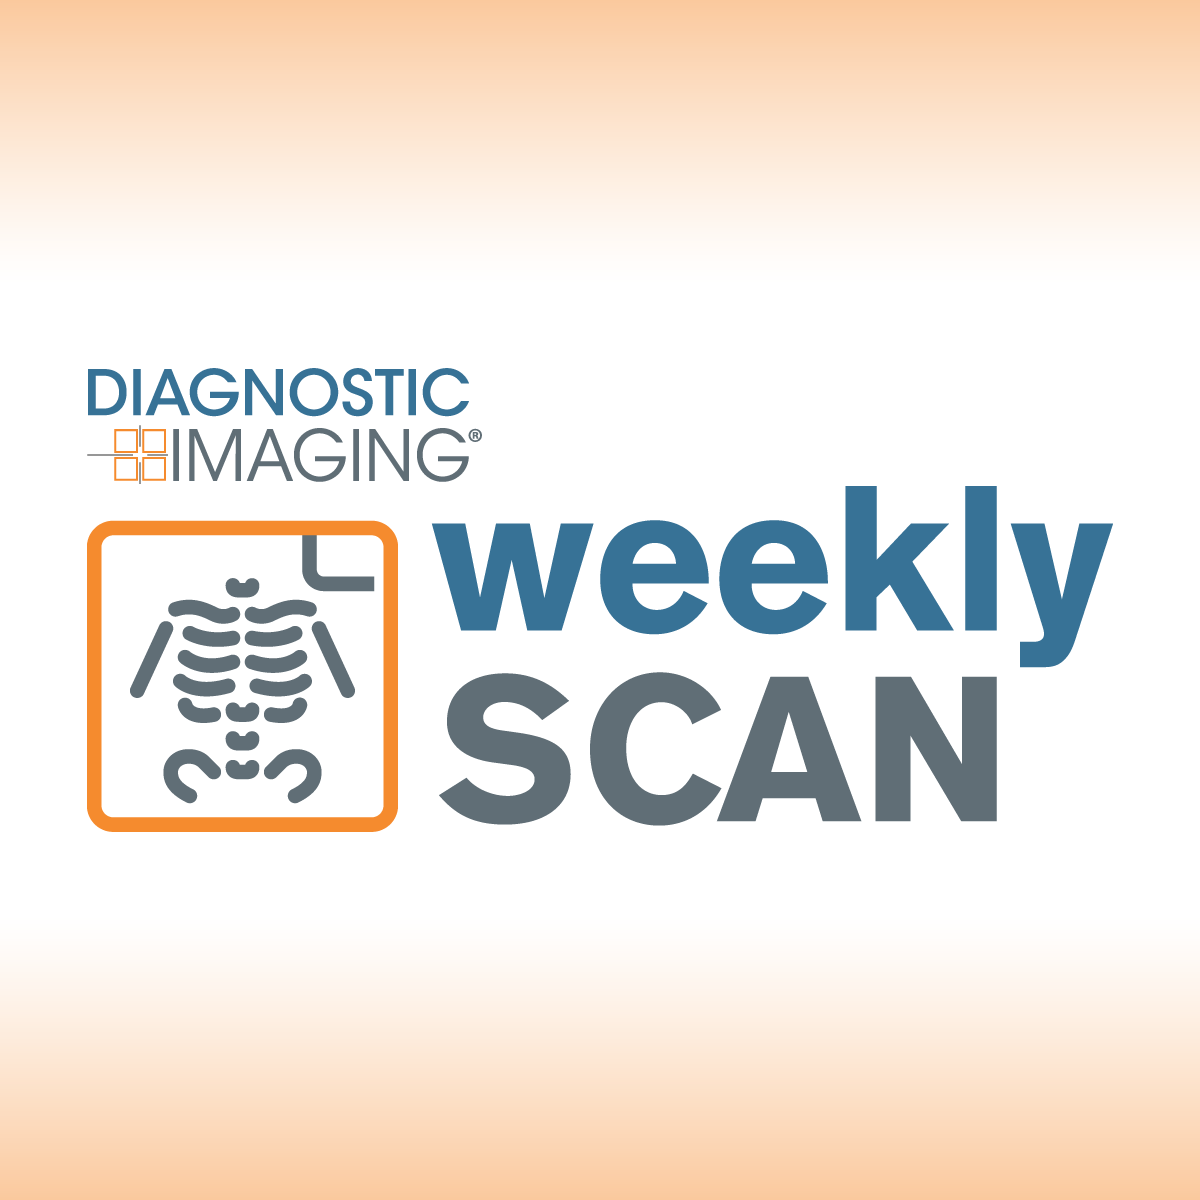 Diagnostic Imaging's Weekly Scan: May 29-June 3